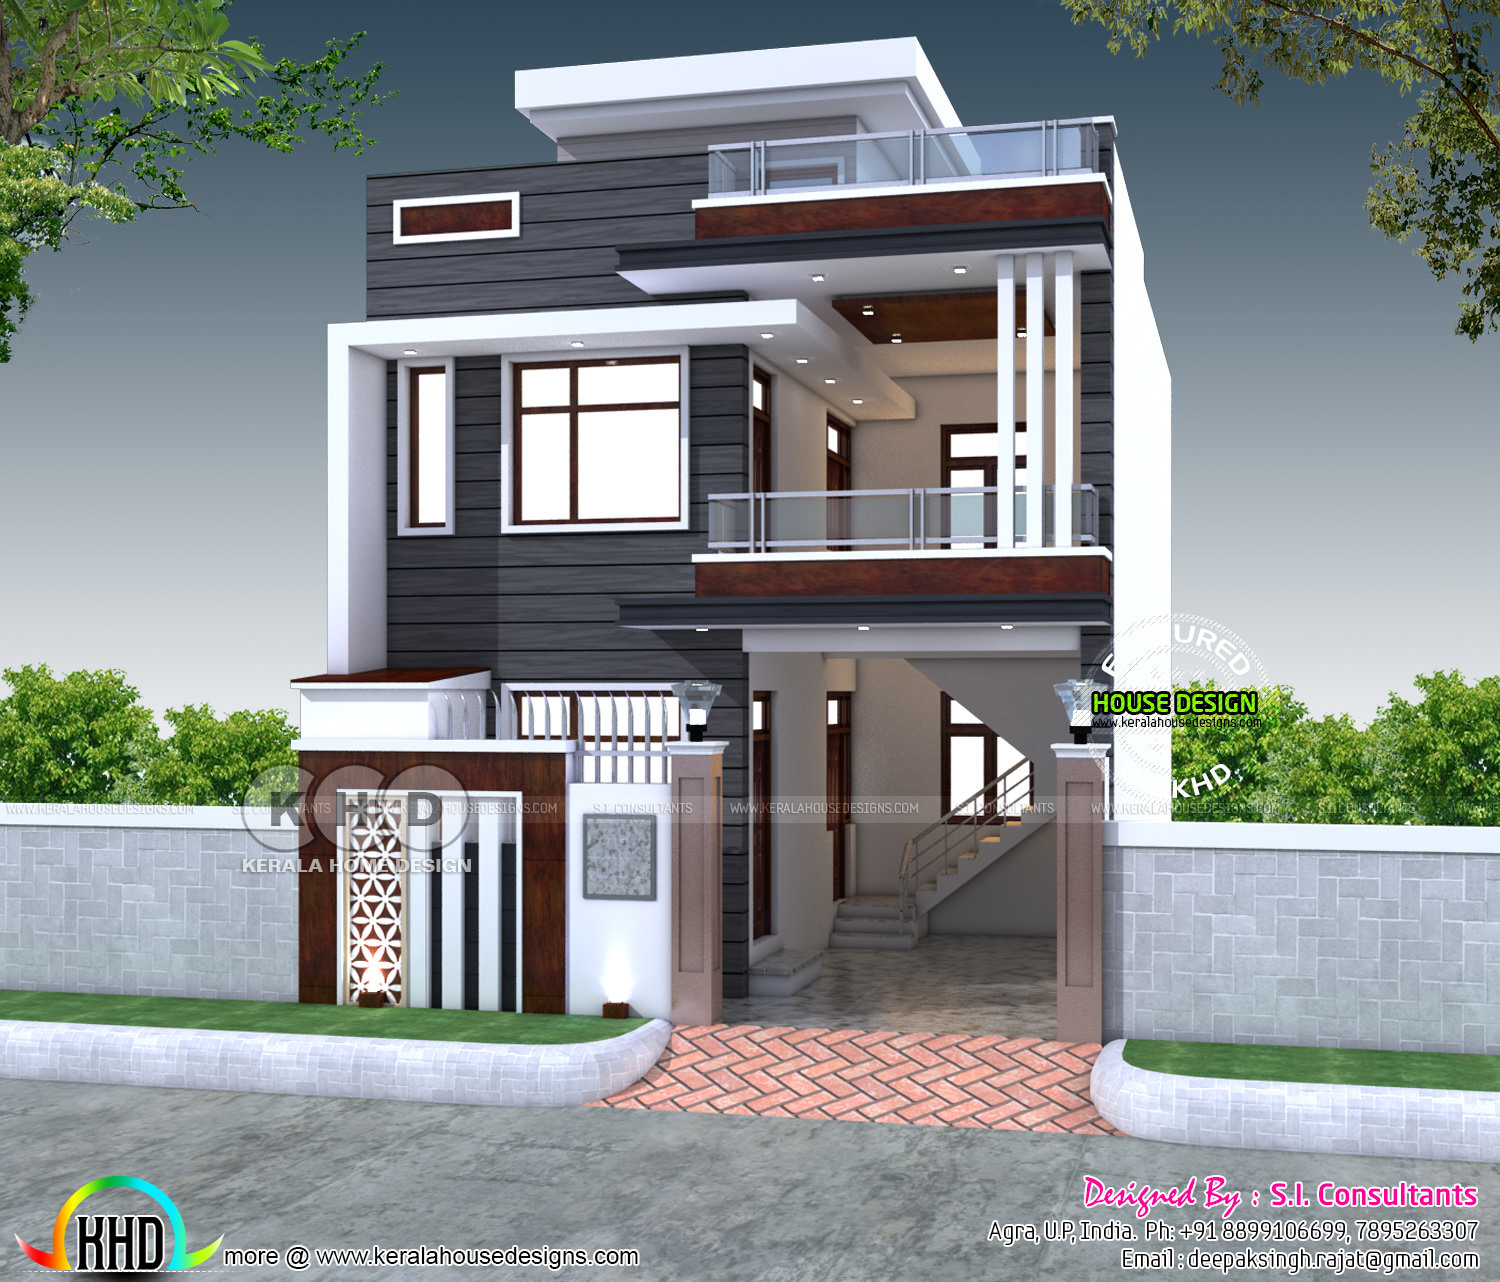 2200 sq ft 4  bedroom  India  house  plan  modern style  